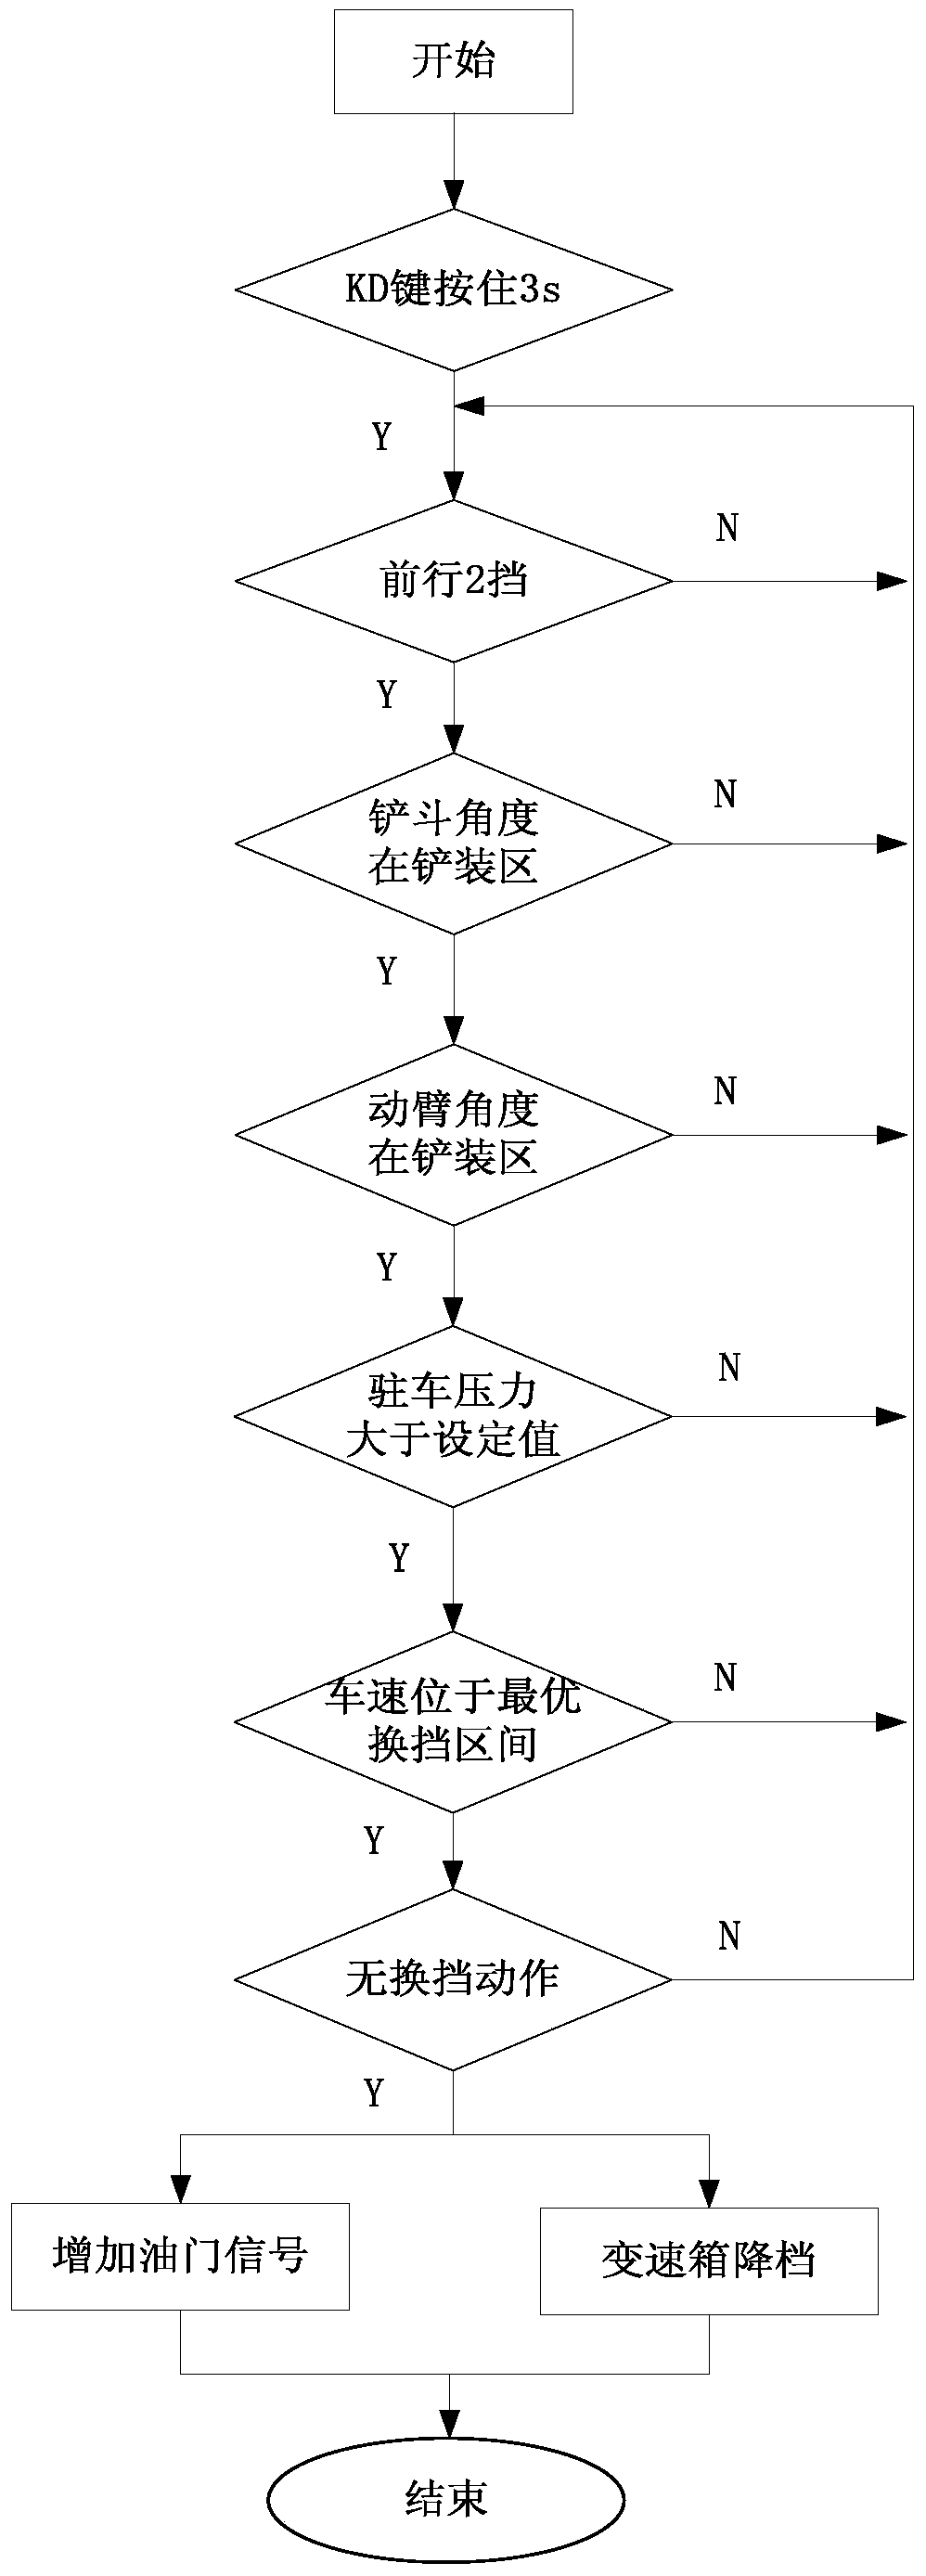 Loader shoveling operation gear control method, device and system